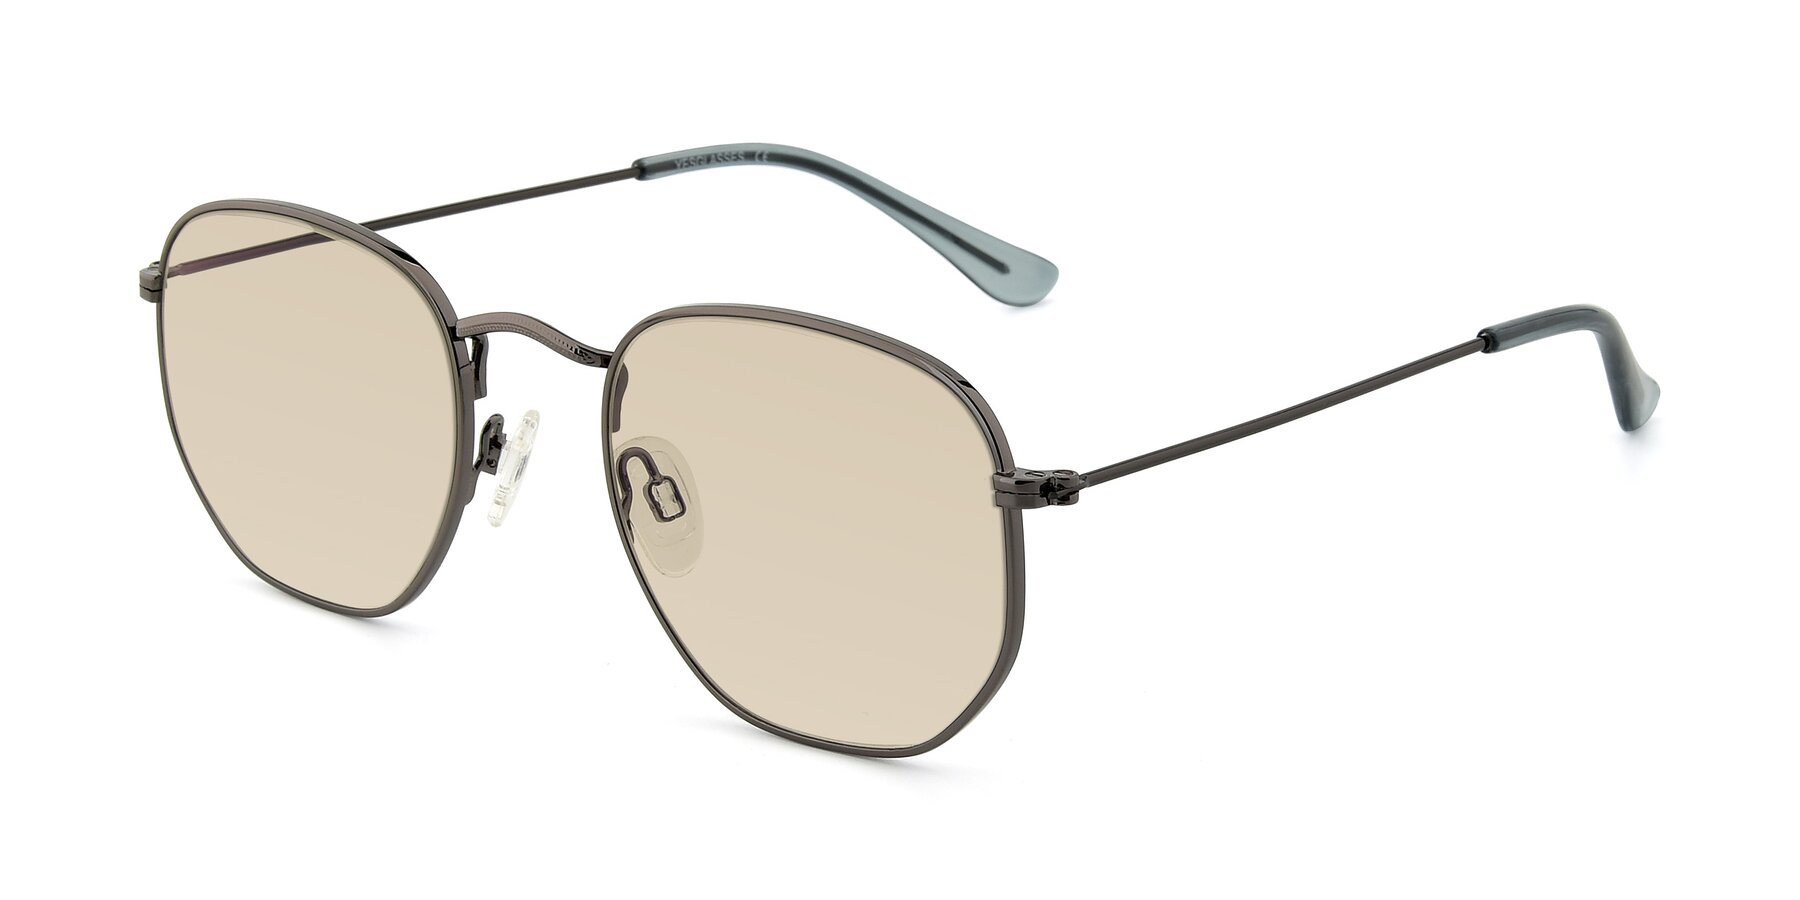 Angle of SSR1944 in Grey with Light Brown Tinted Lenses